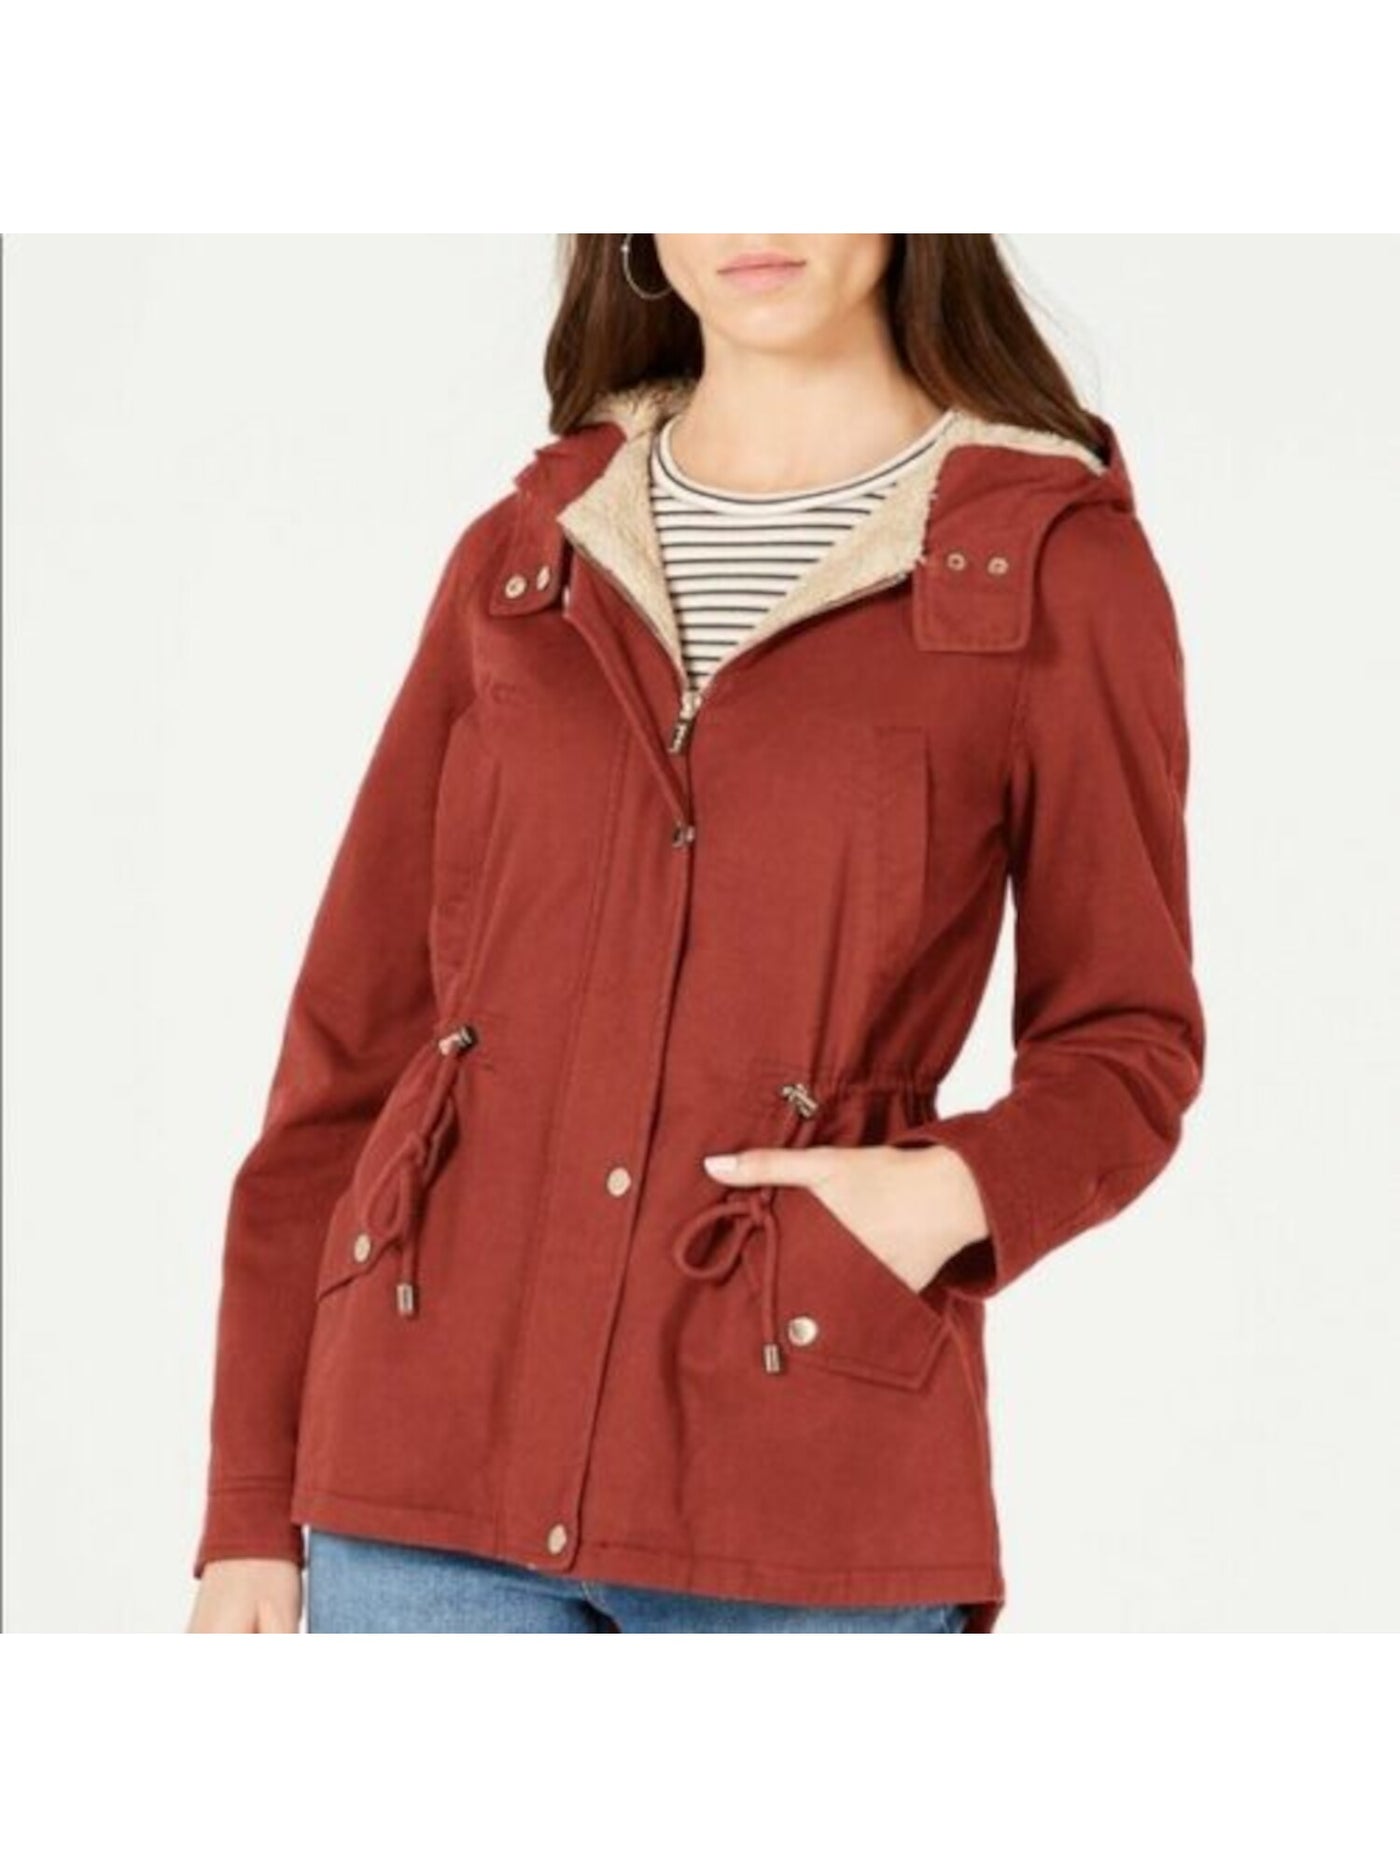 COLLECTIONB Womens Pocketed Zippered Hooded Anorak Button Down Jacket